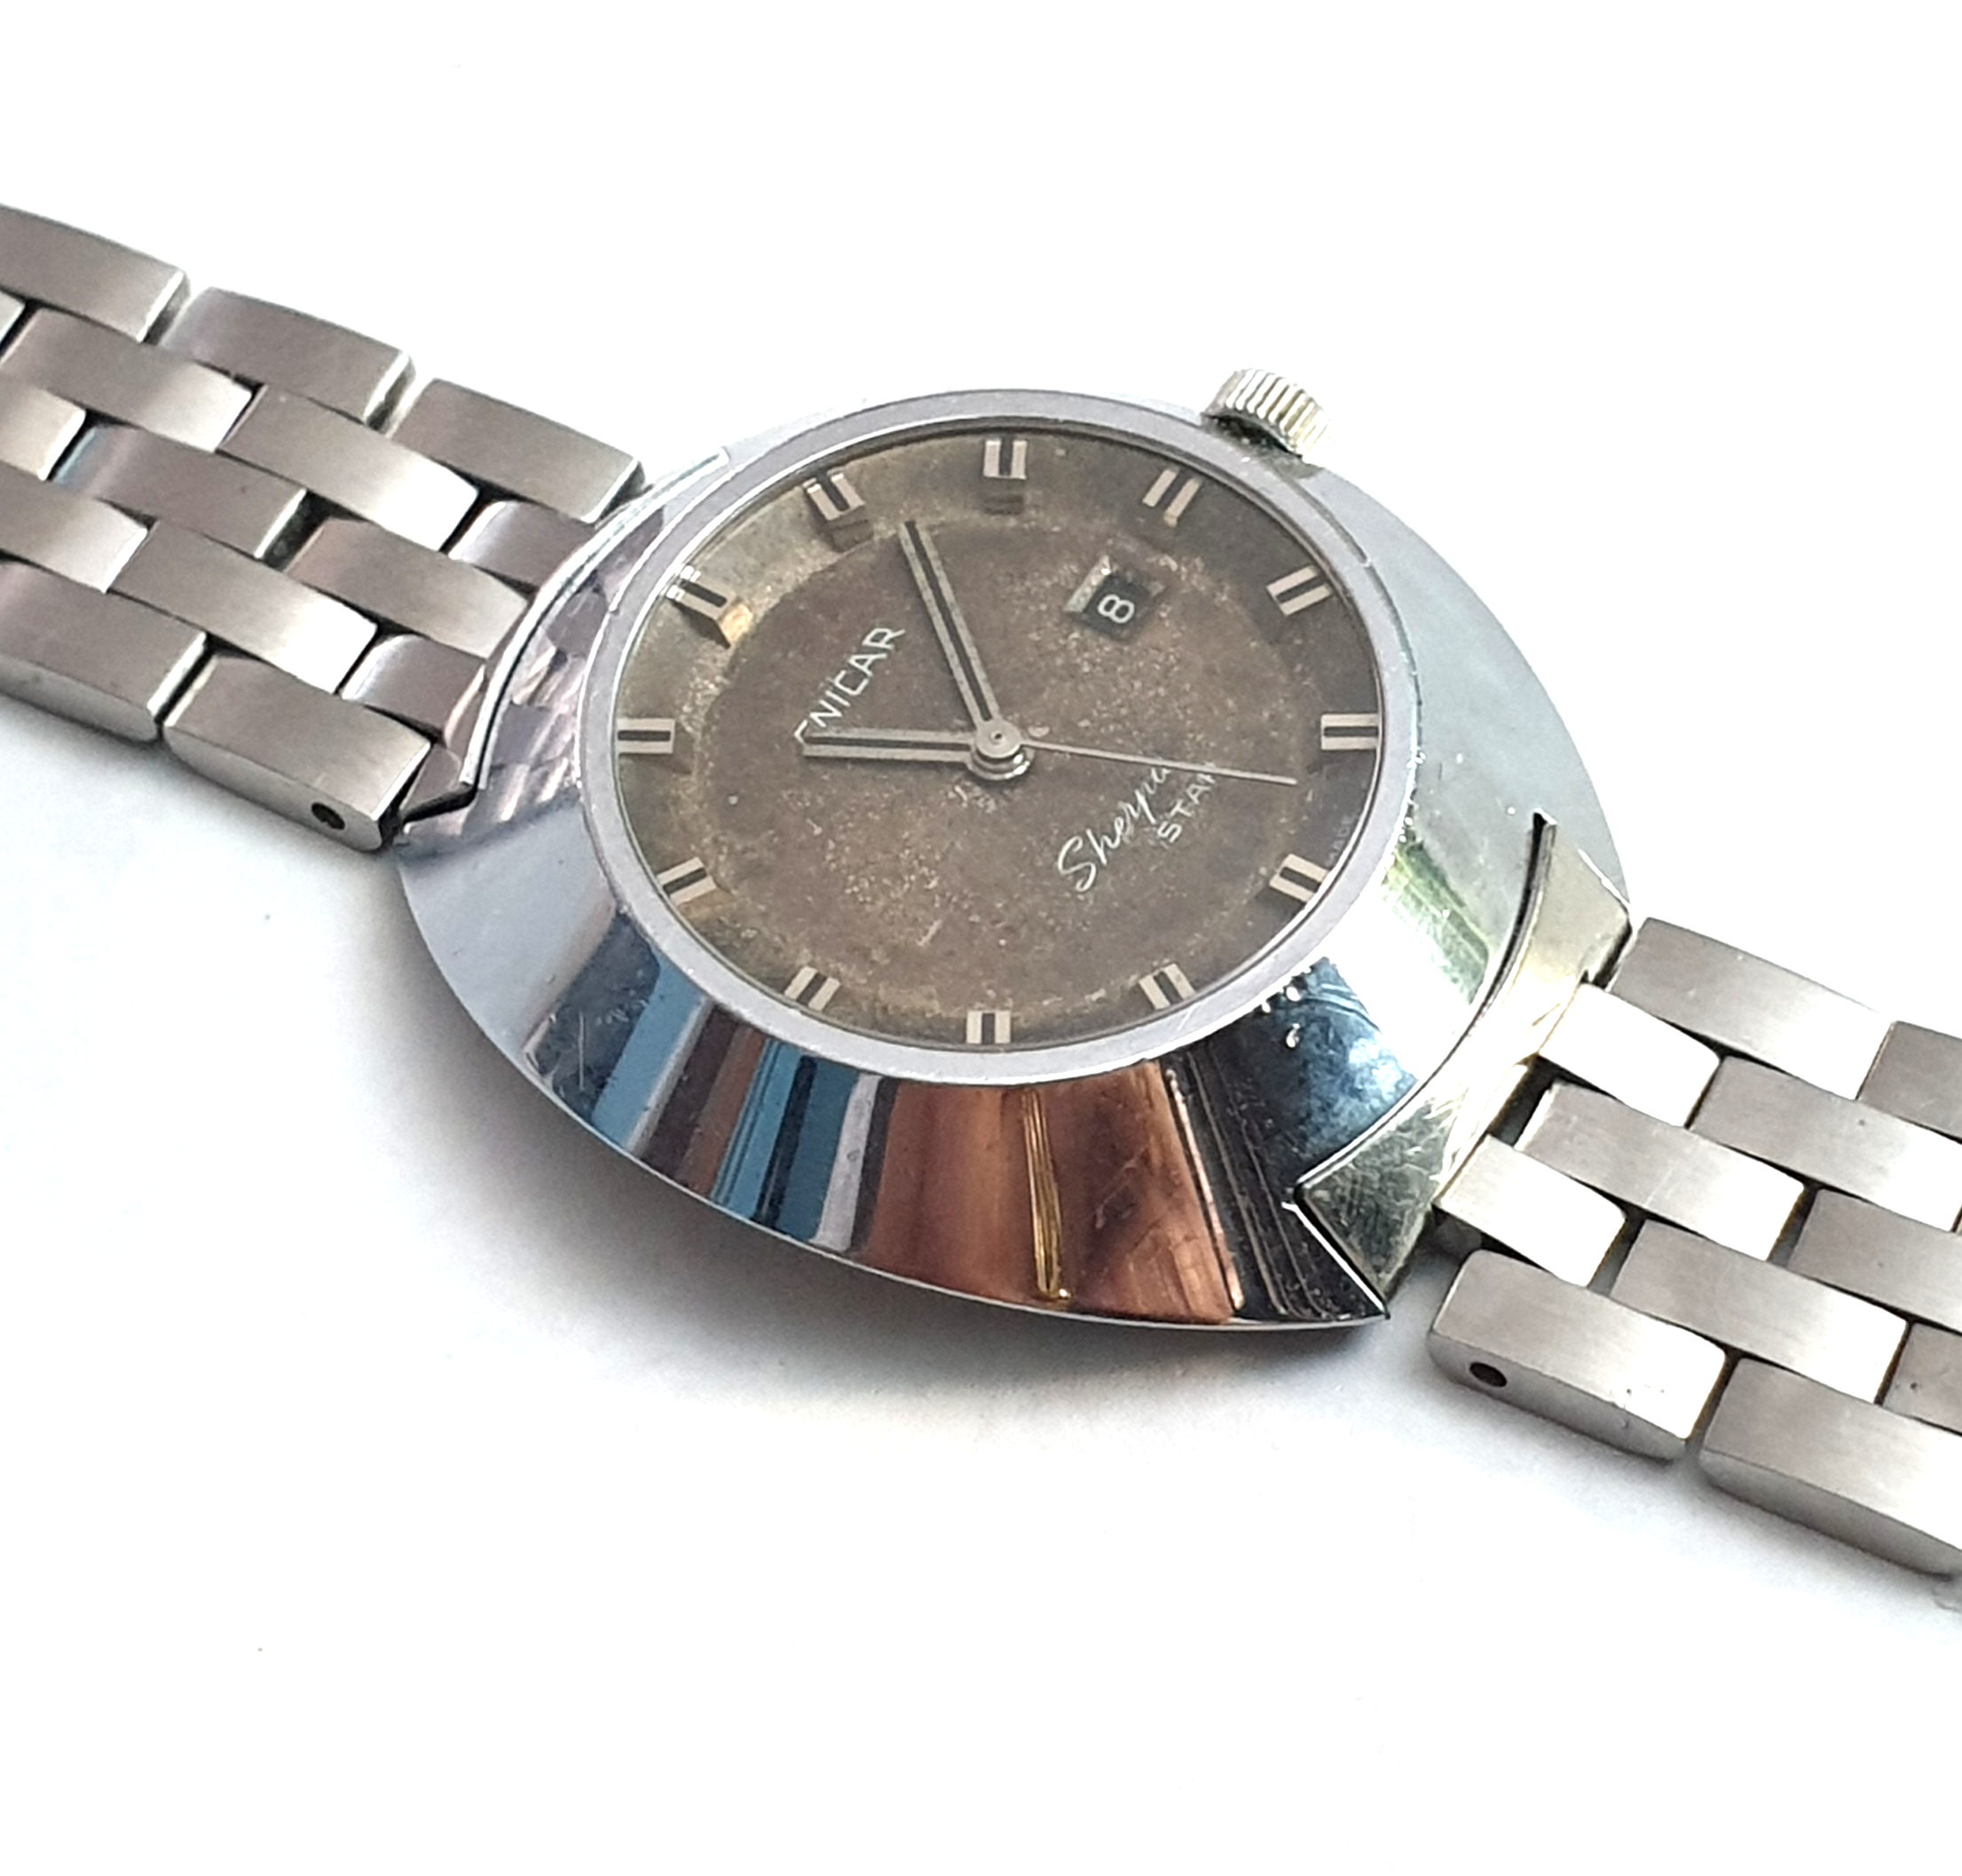 ENICAR SHERPA STAR UNISEX MODEL 765-06-01 AUTOMATIC DATE IN STAINLESS STEEL WITH ORIGINIAL - Image 6 of 8